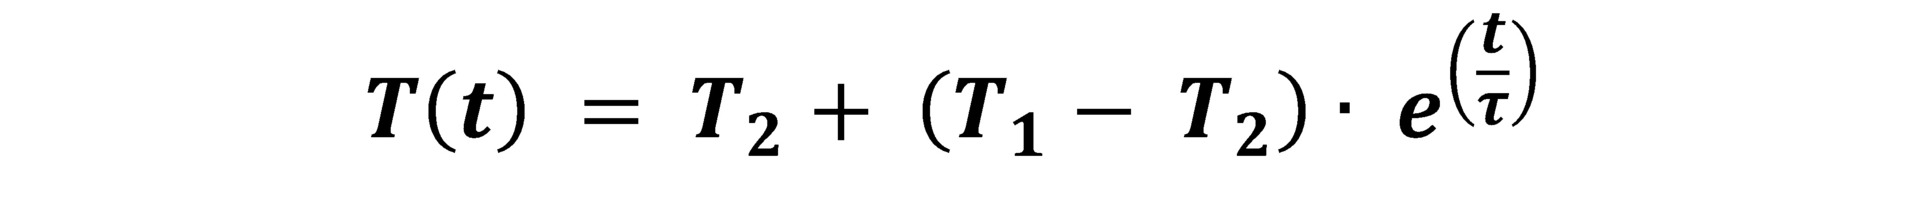 Equation for the thermal time constant (tao) of a thermistor.